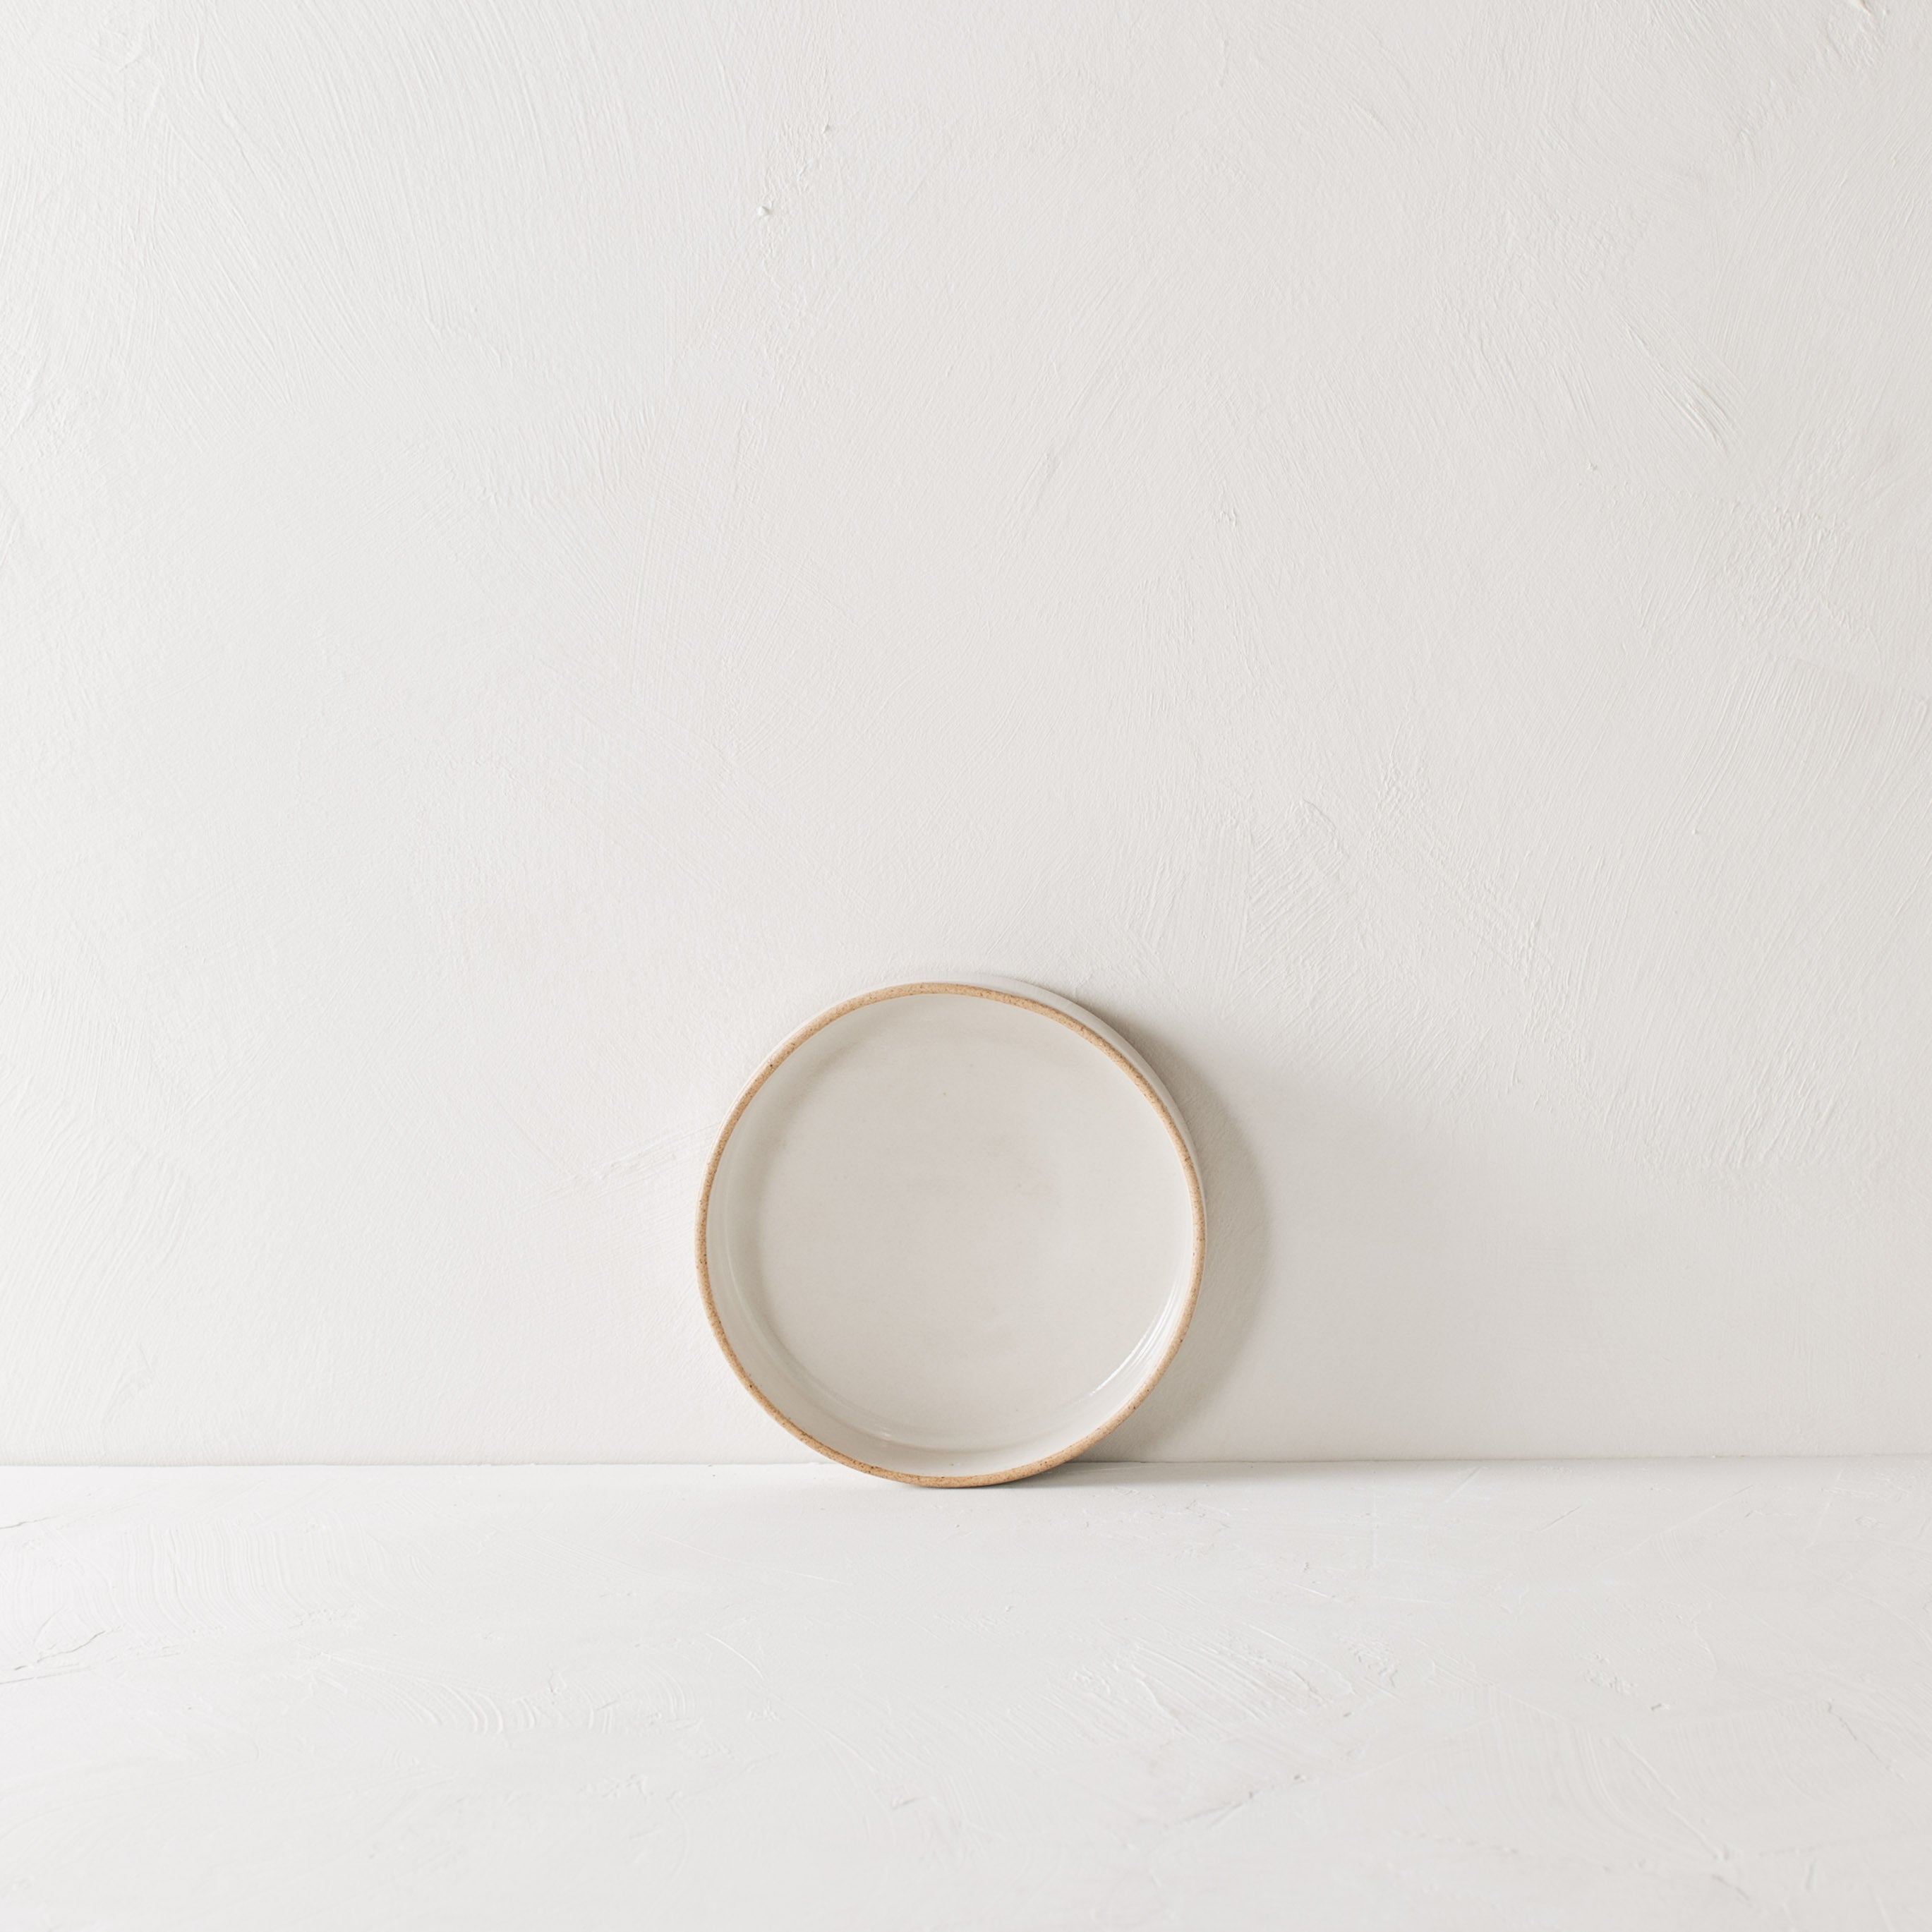 Minimal white salad dish leaning against the backdrop. Exposed stoneware rim can be seen. Handmade ceramic salad dish, designed and sold by Convivial Production, Kansas City ceramics.